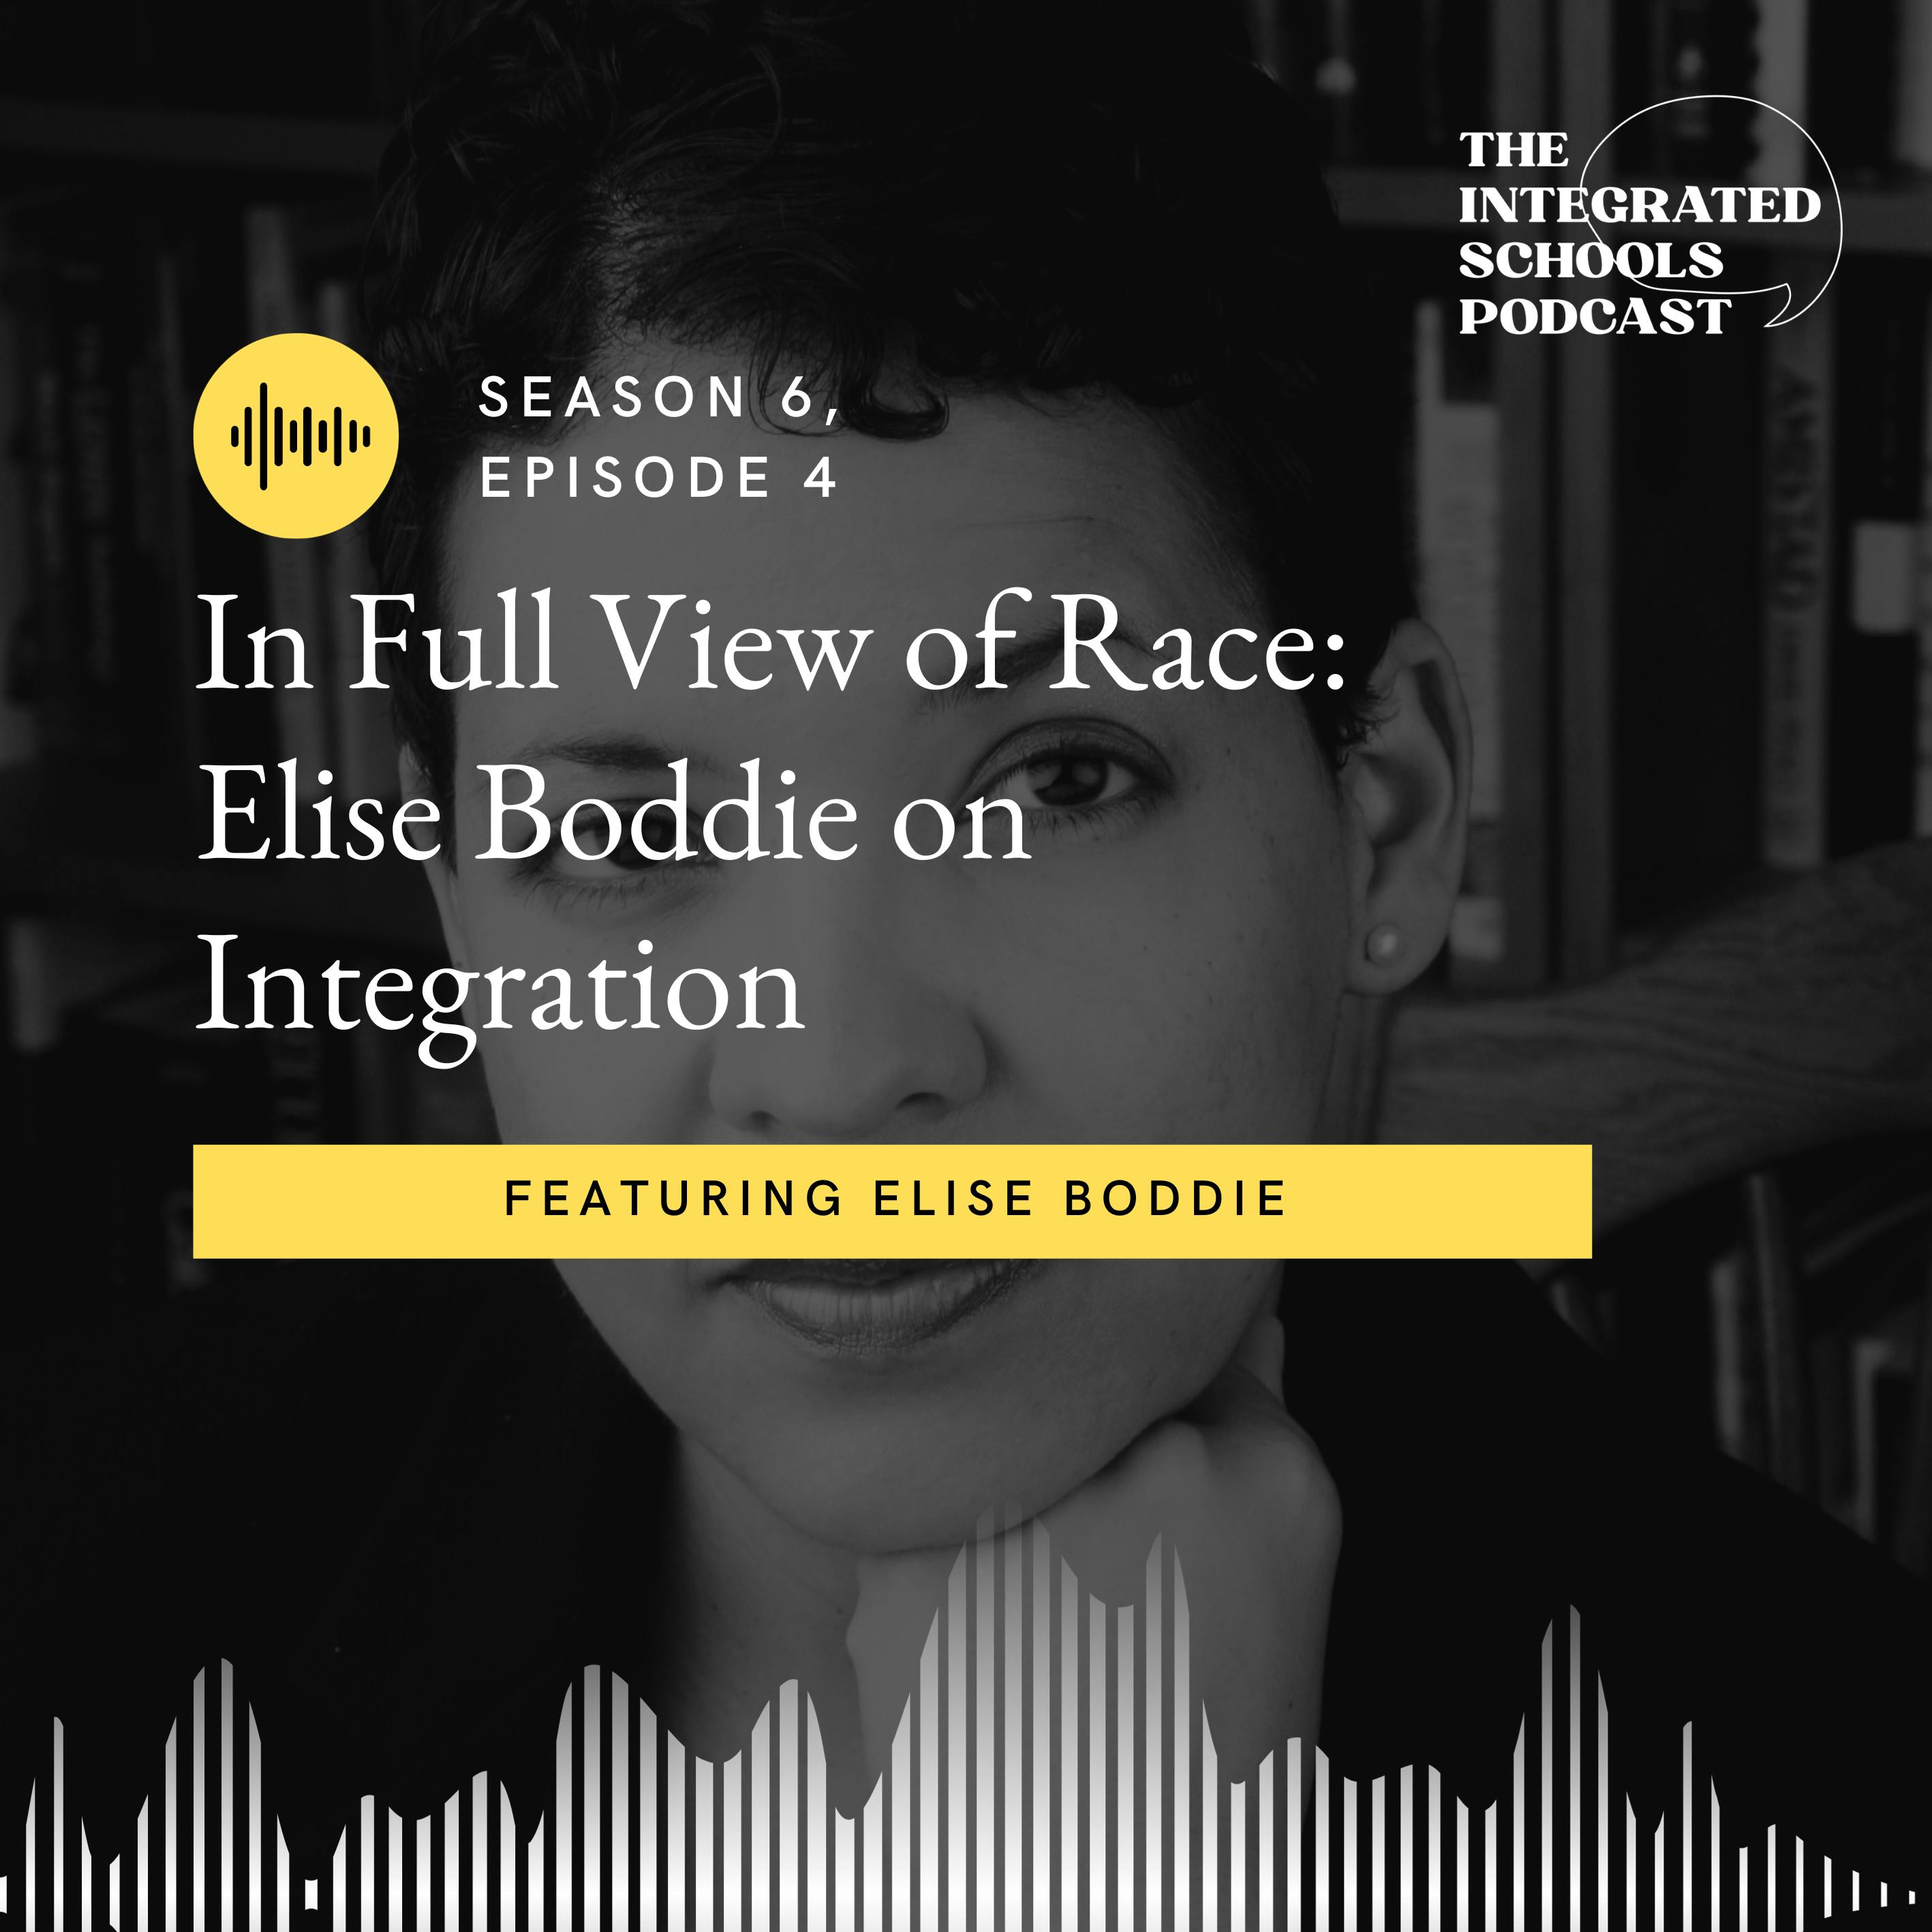 In Full View of Race: Elise Boddie on Integration